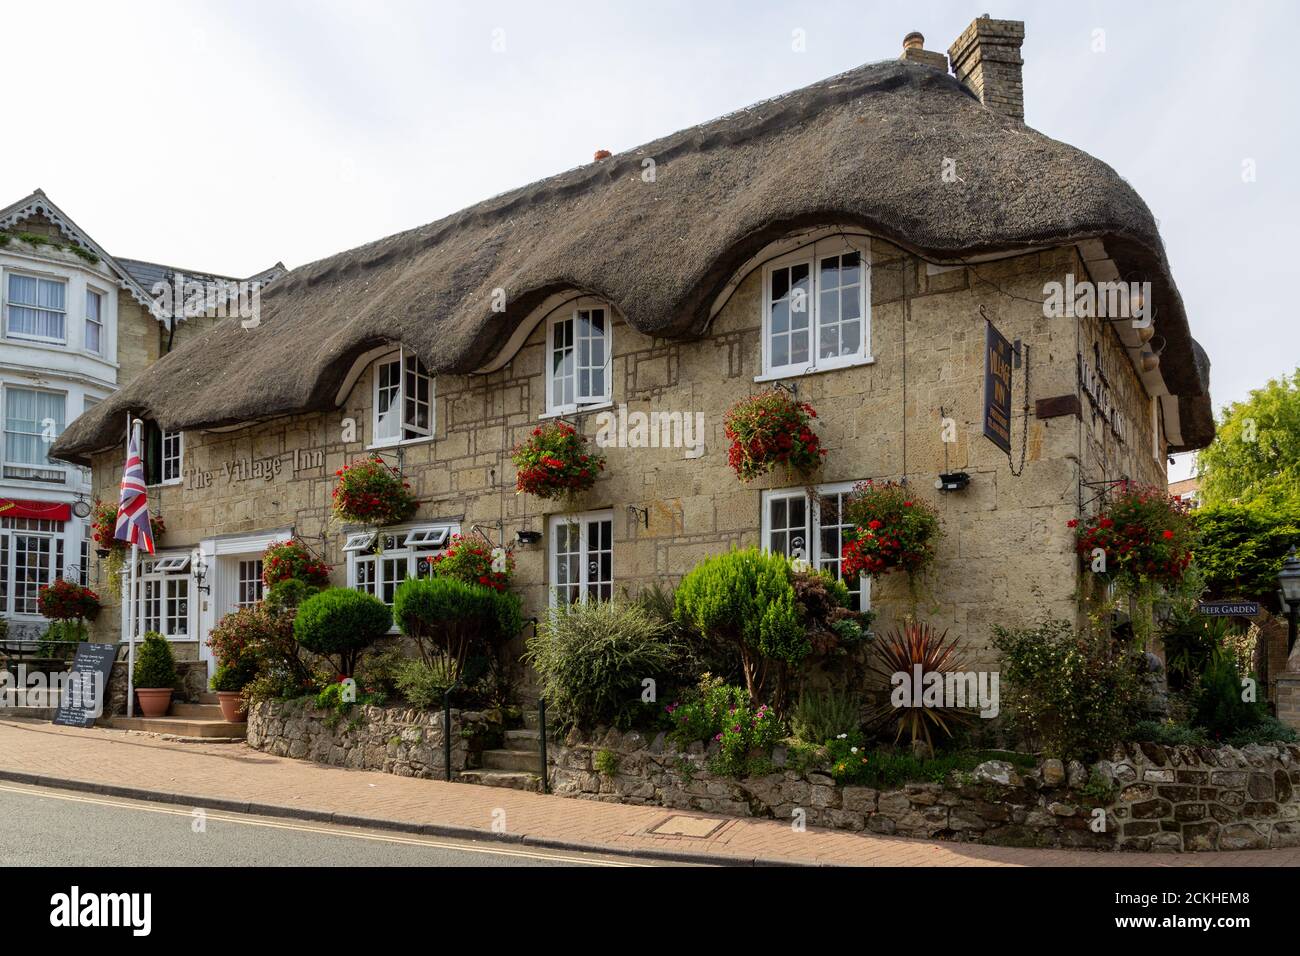 The Village inn Pub and hotel in Shanklin on the Isle of wight, A typical english pub with a thatched roof Stock Photo